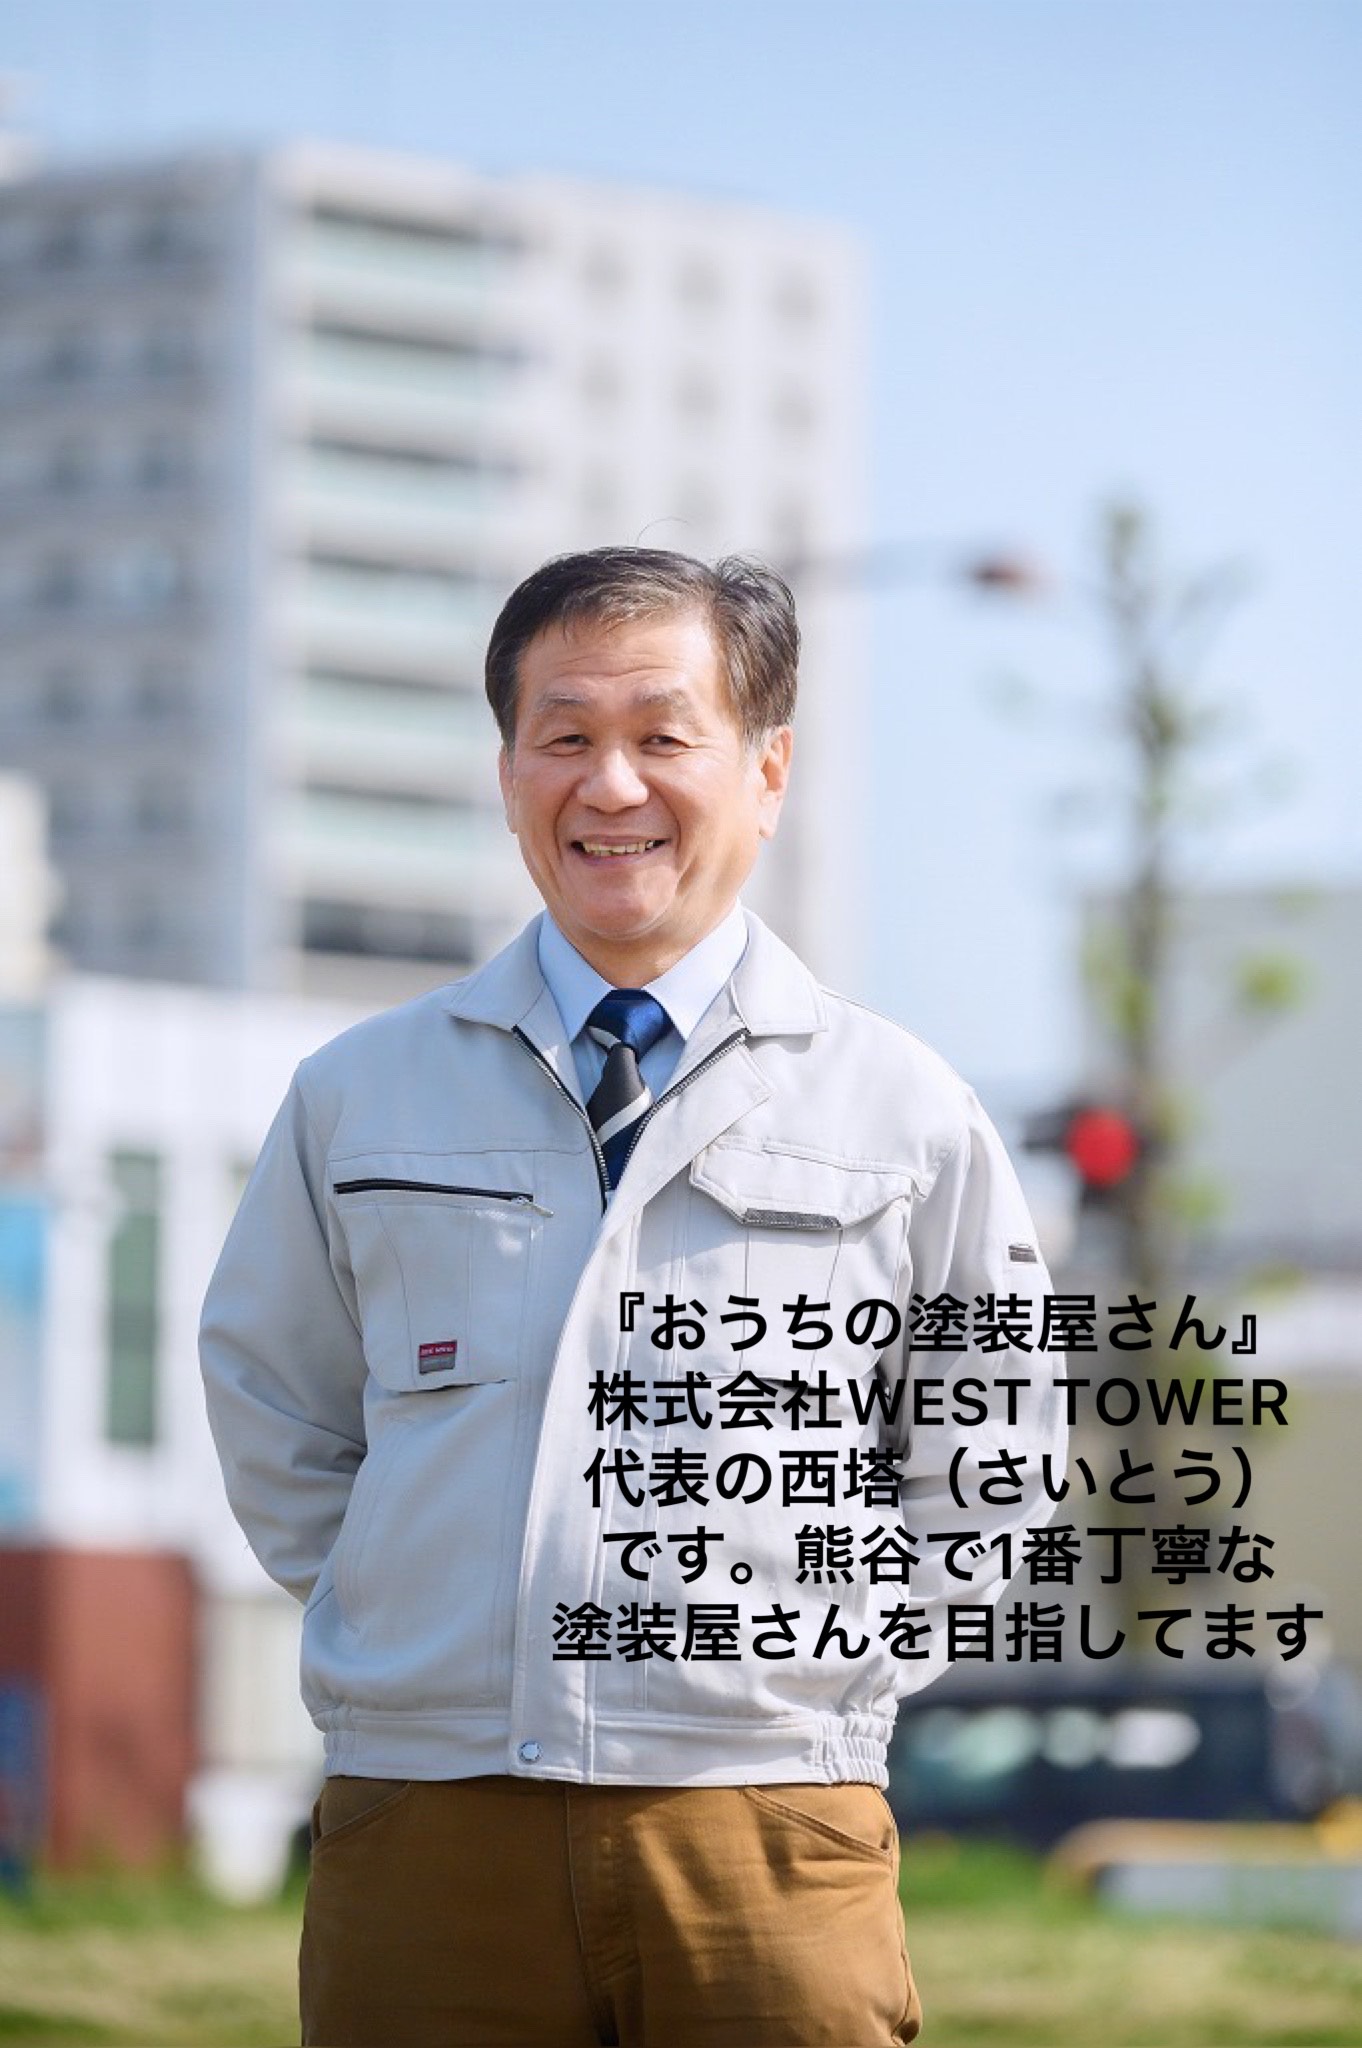 Images おうちの塗装屋さん 株式会社WEST TOWER